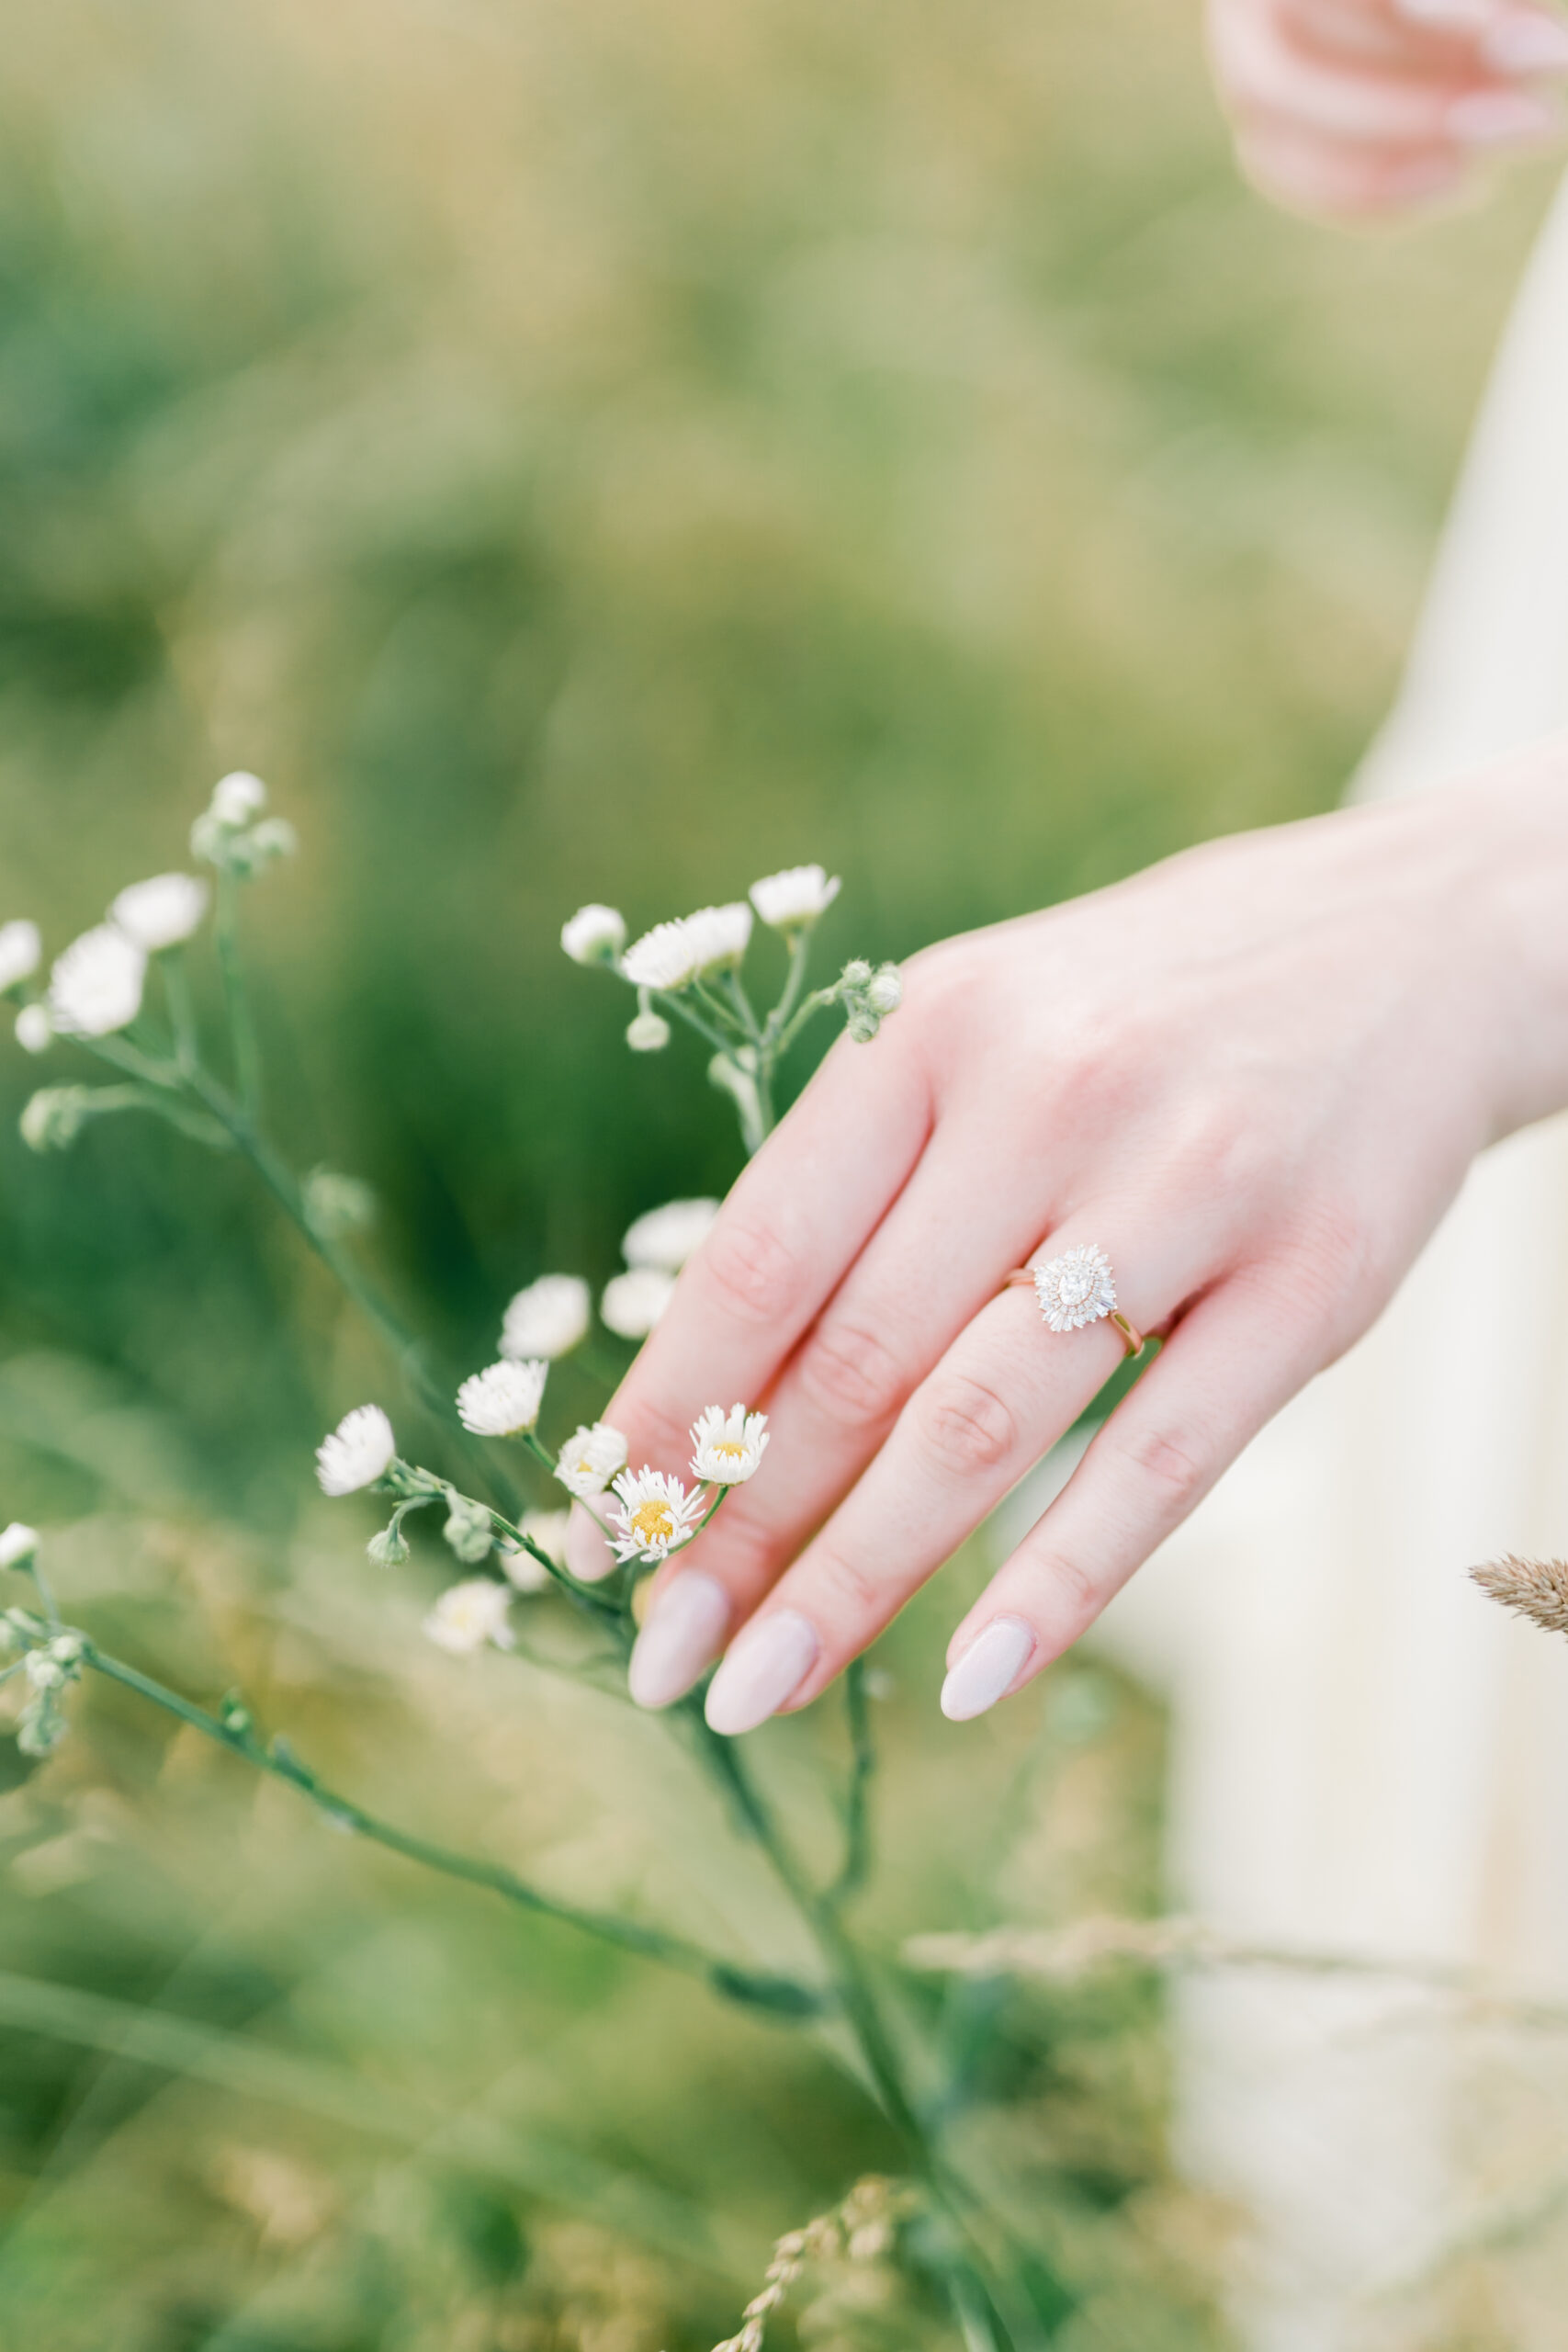 Woman holding small white flowers with engagement ring showing prominently